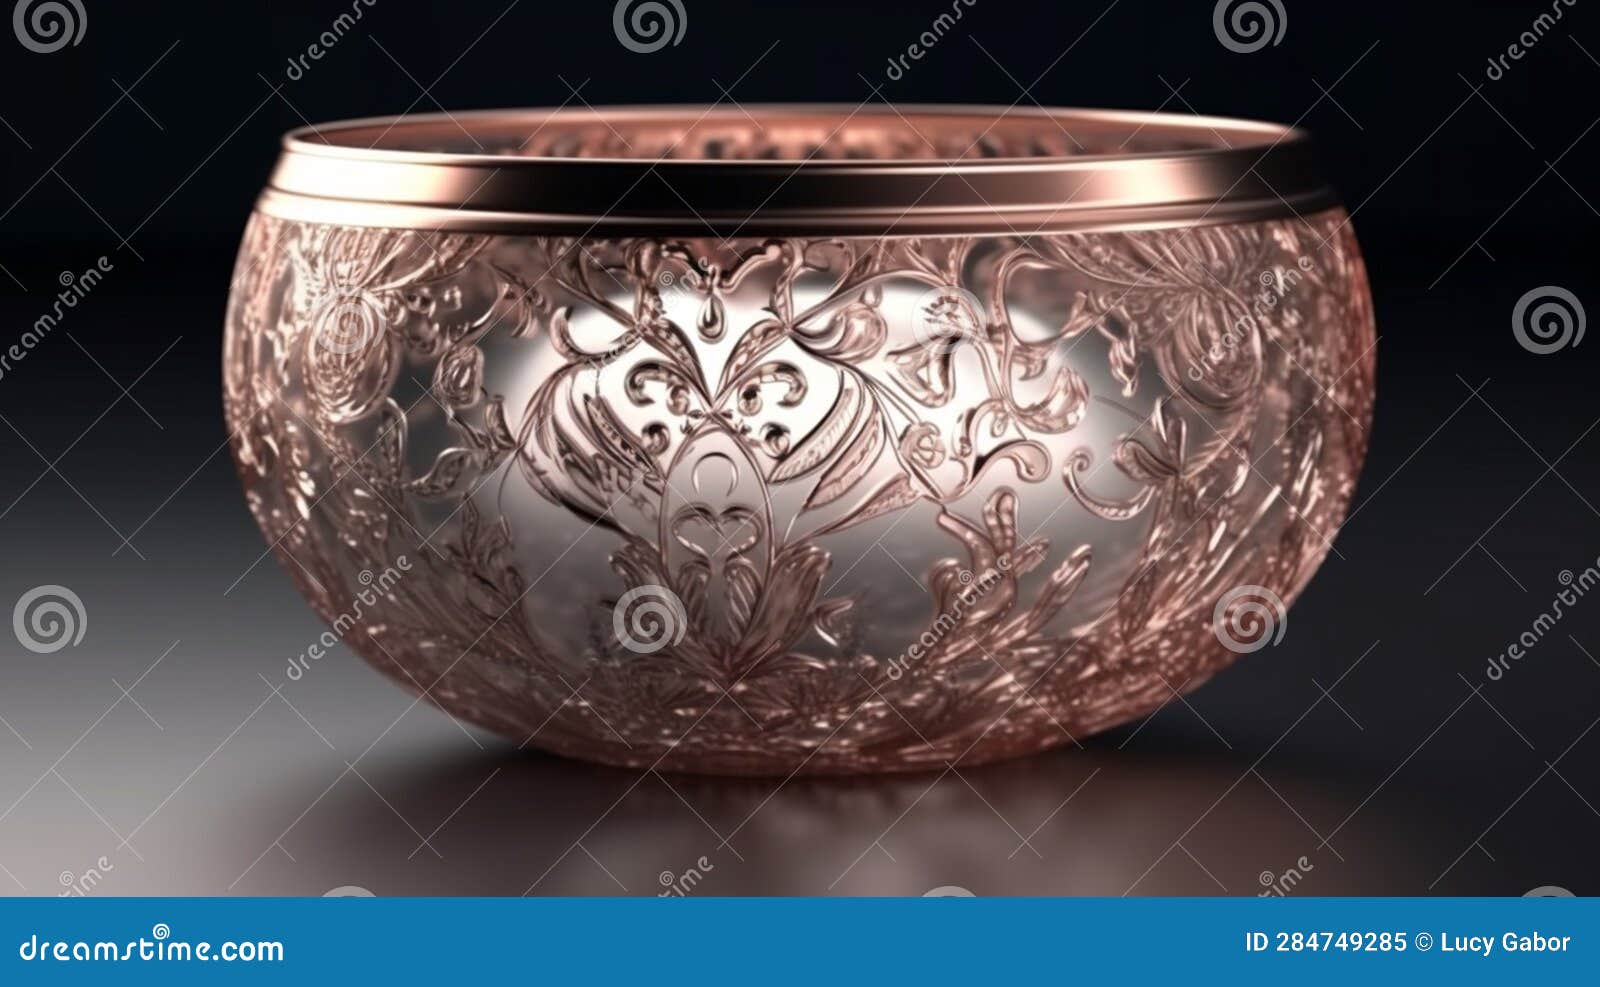 a small bowl with boheme decoration on gray background